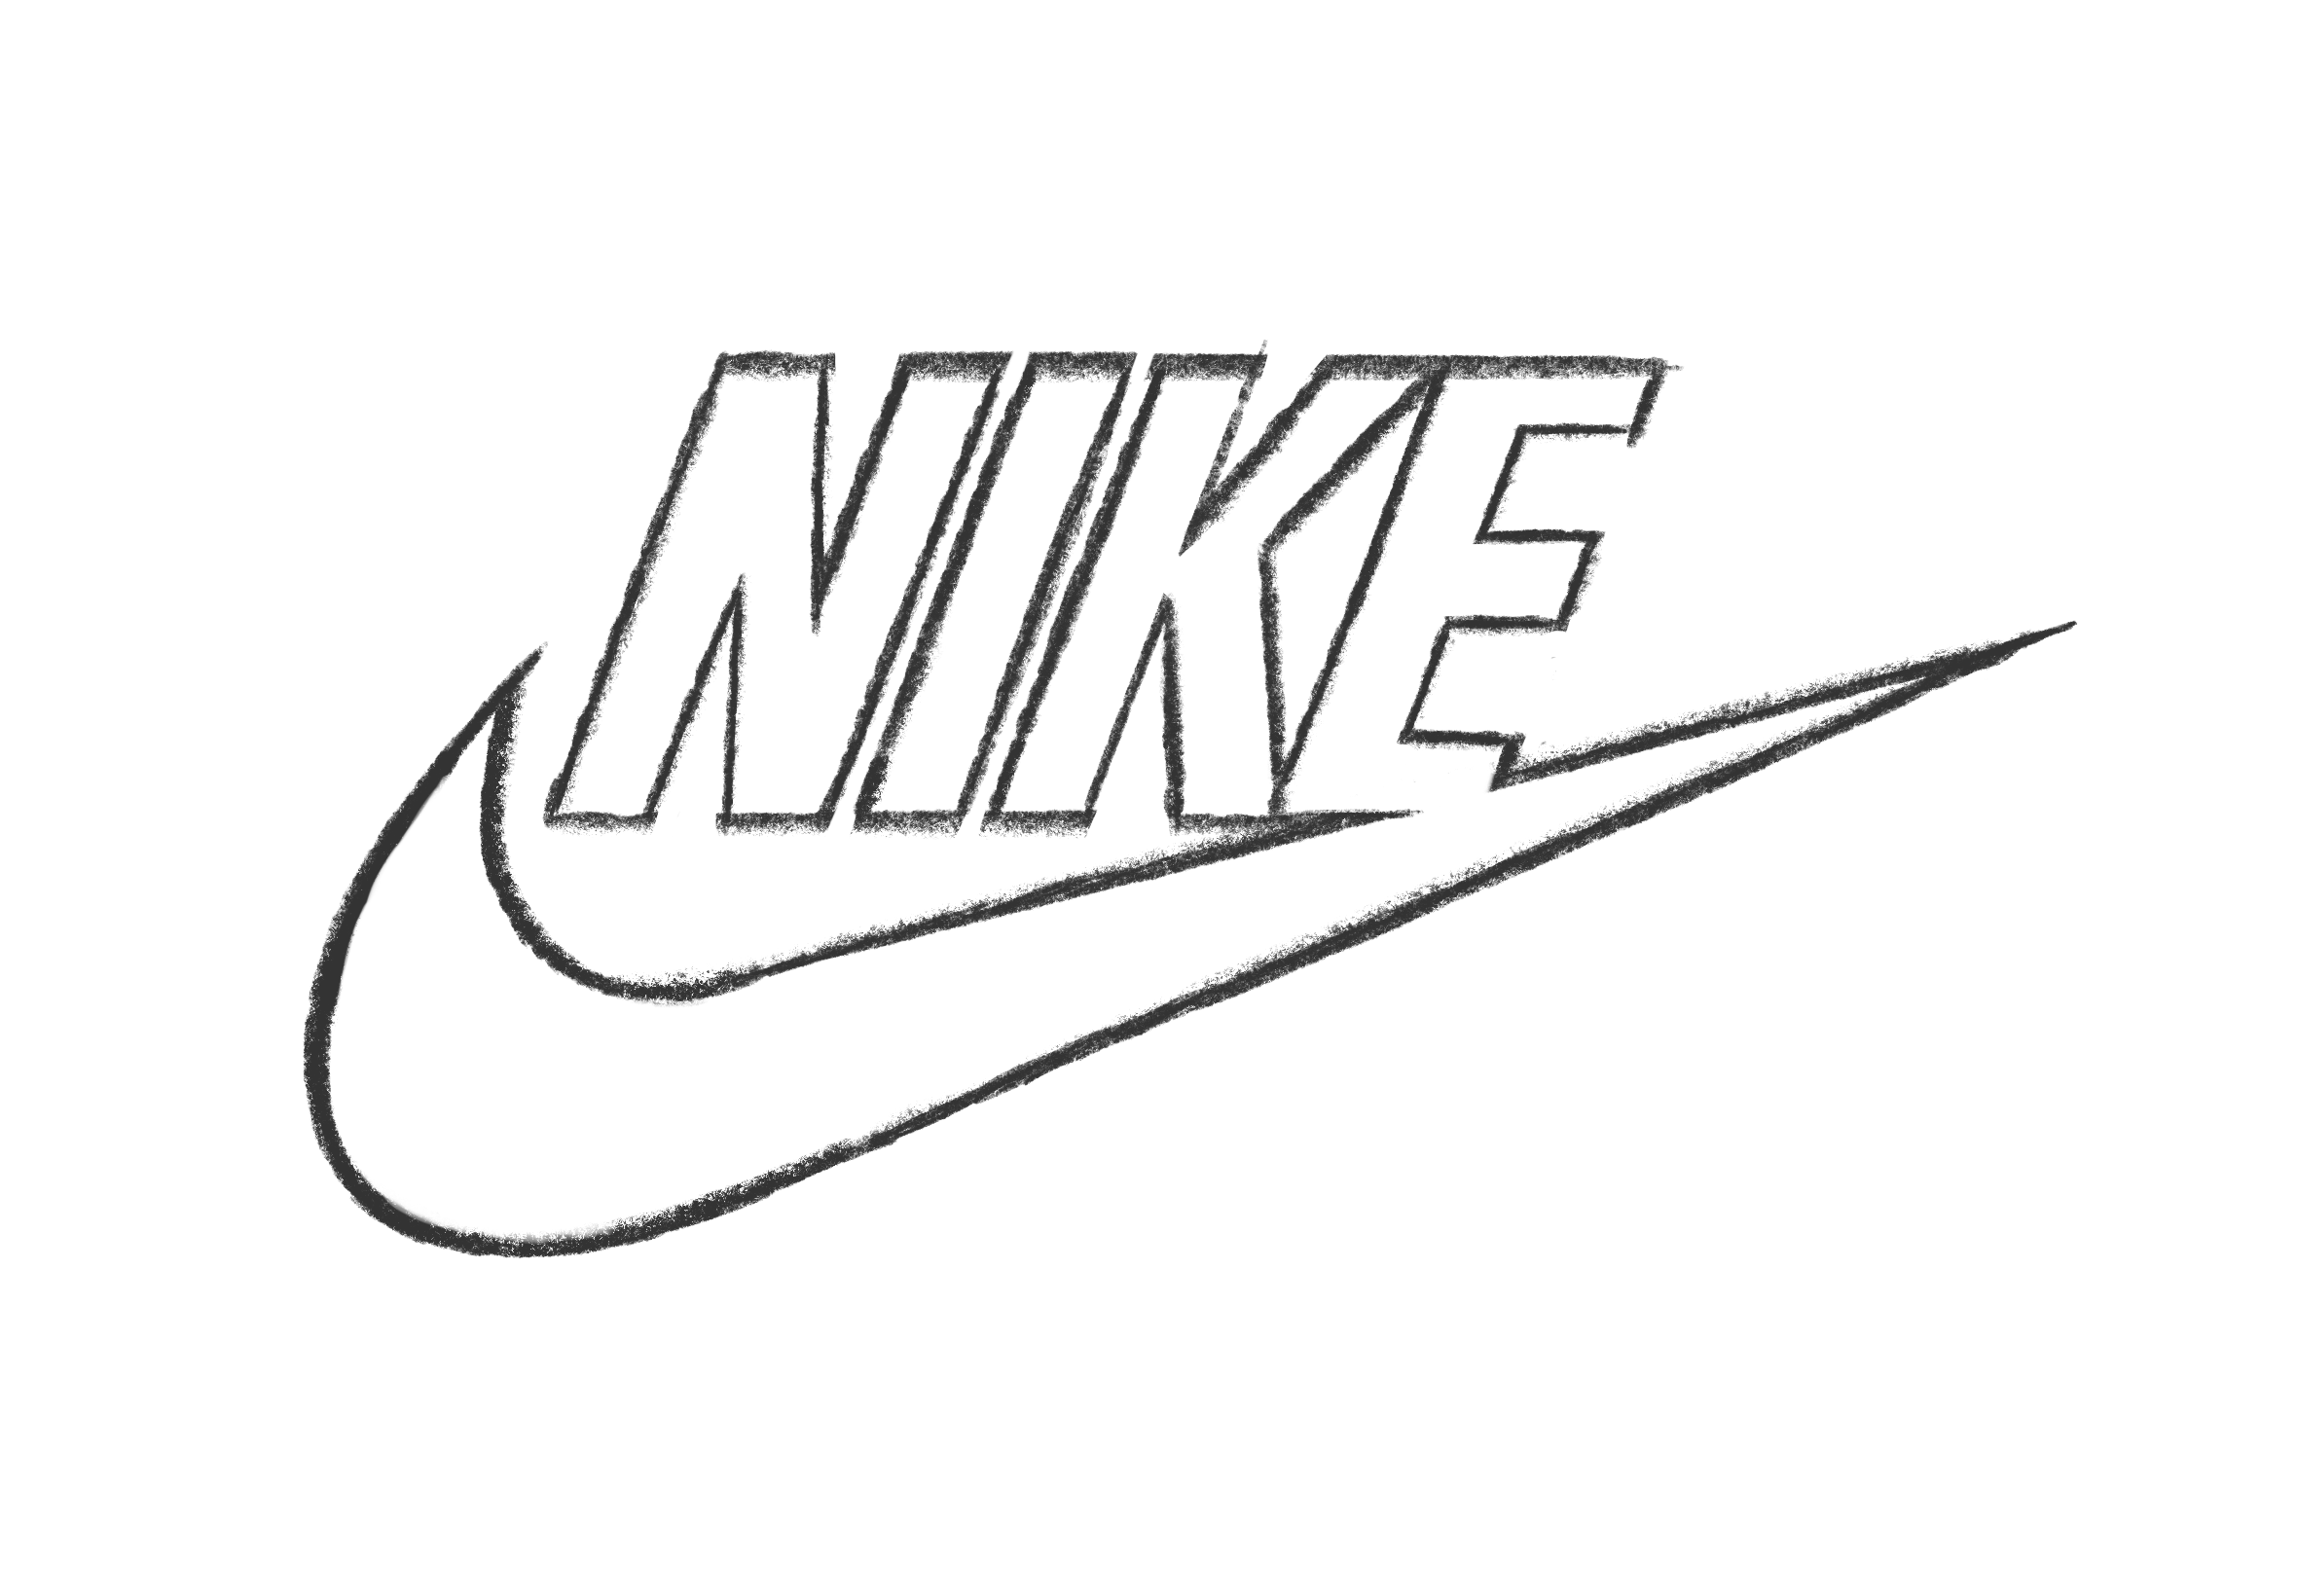 Step 7 of drawing the Nike logo: Trace the letters and erase the outlines to finish the logo